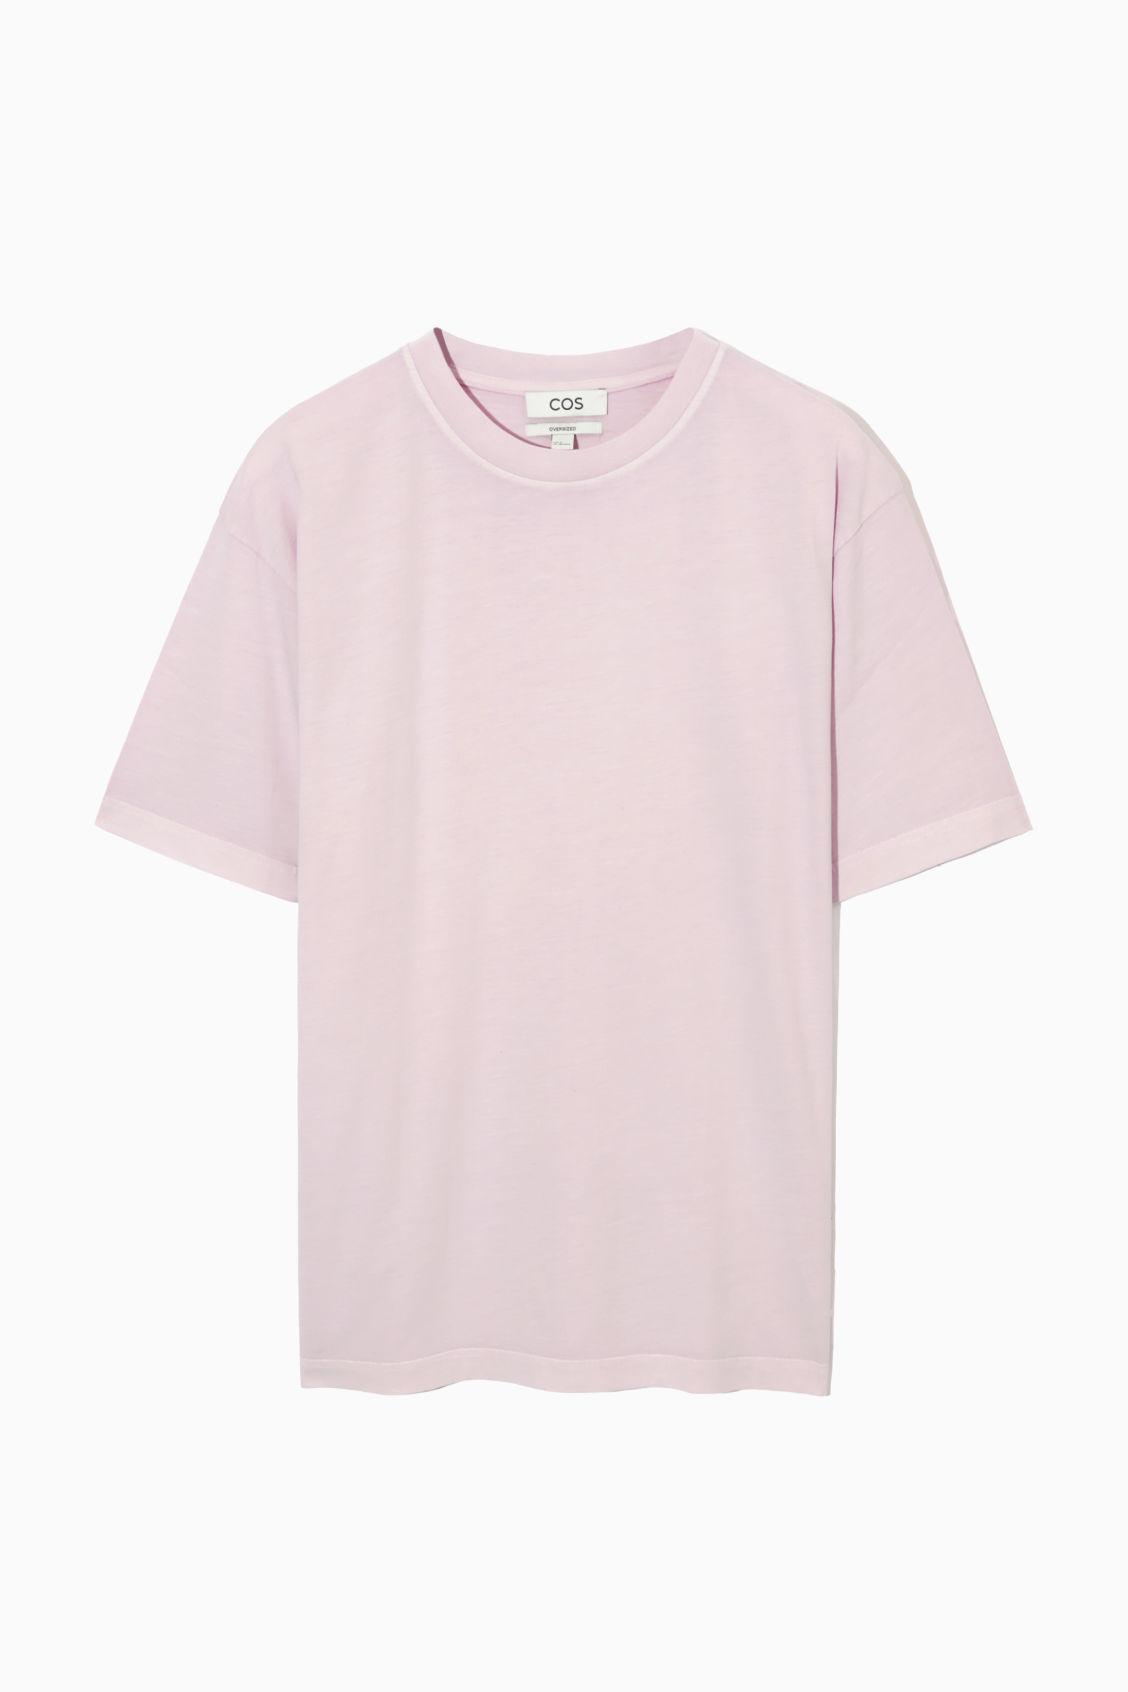 COS The Super Slouch T-shirt in Pink for Men | Lyst